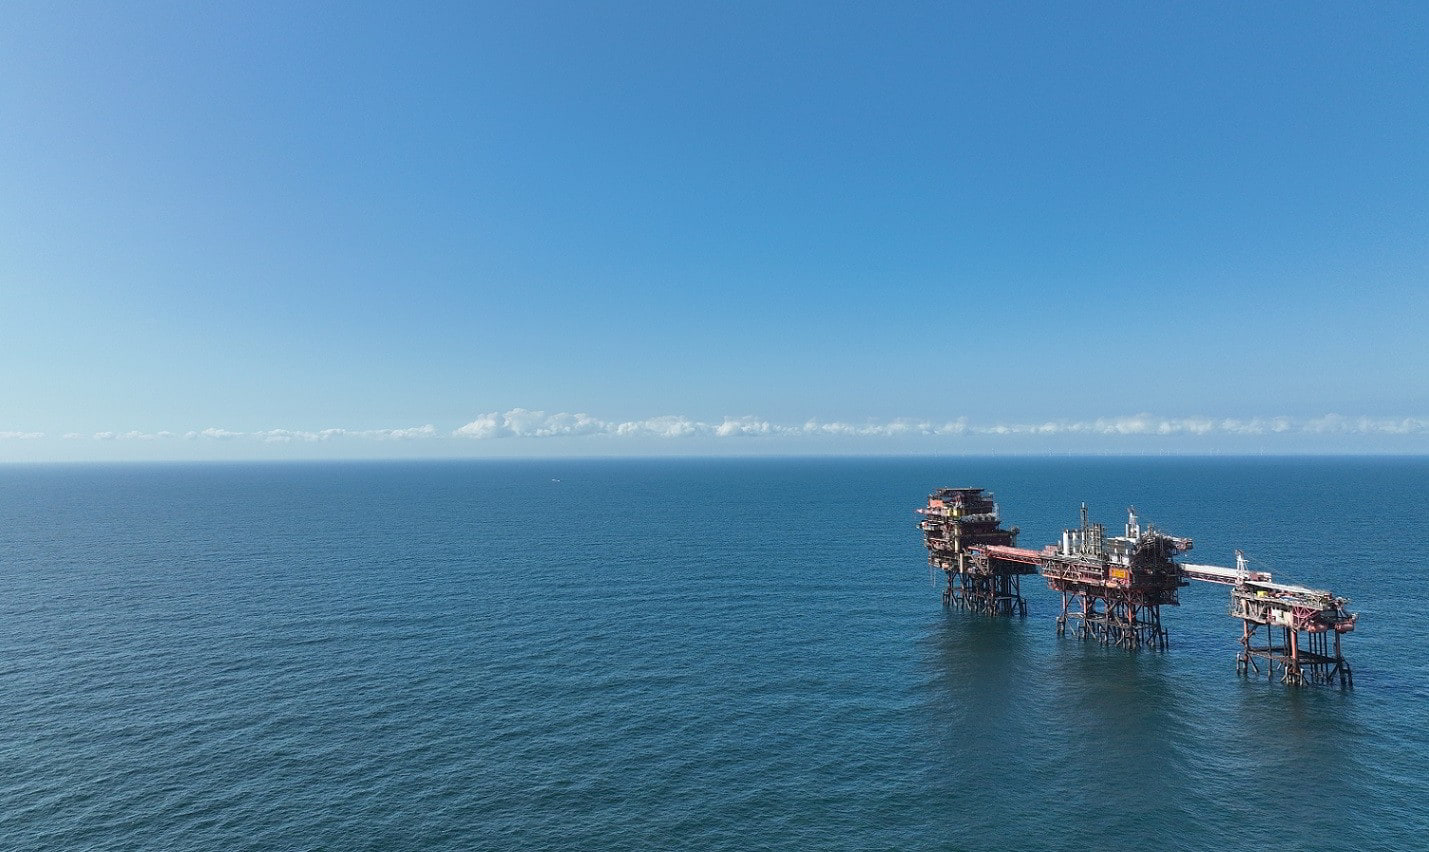 Centrica knocks on Wood’s door for UK North Sea support